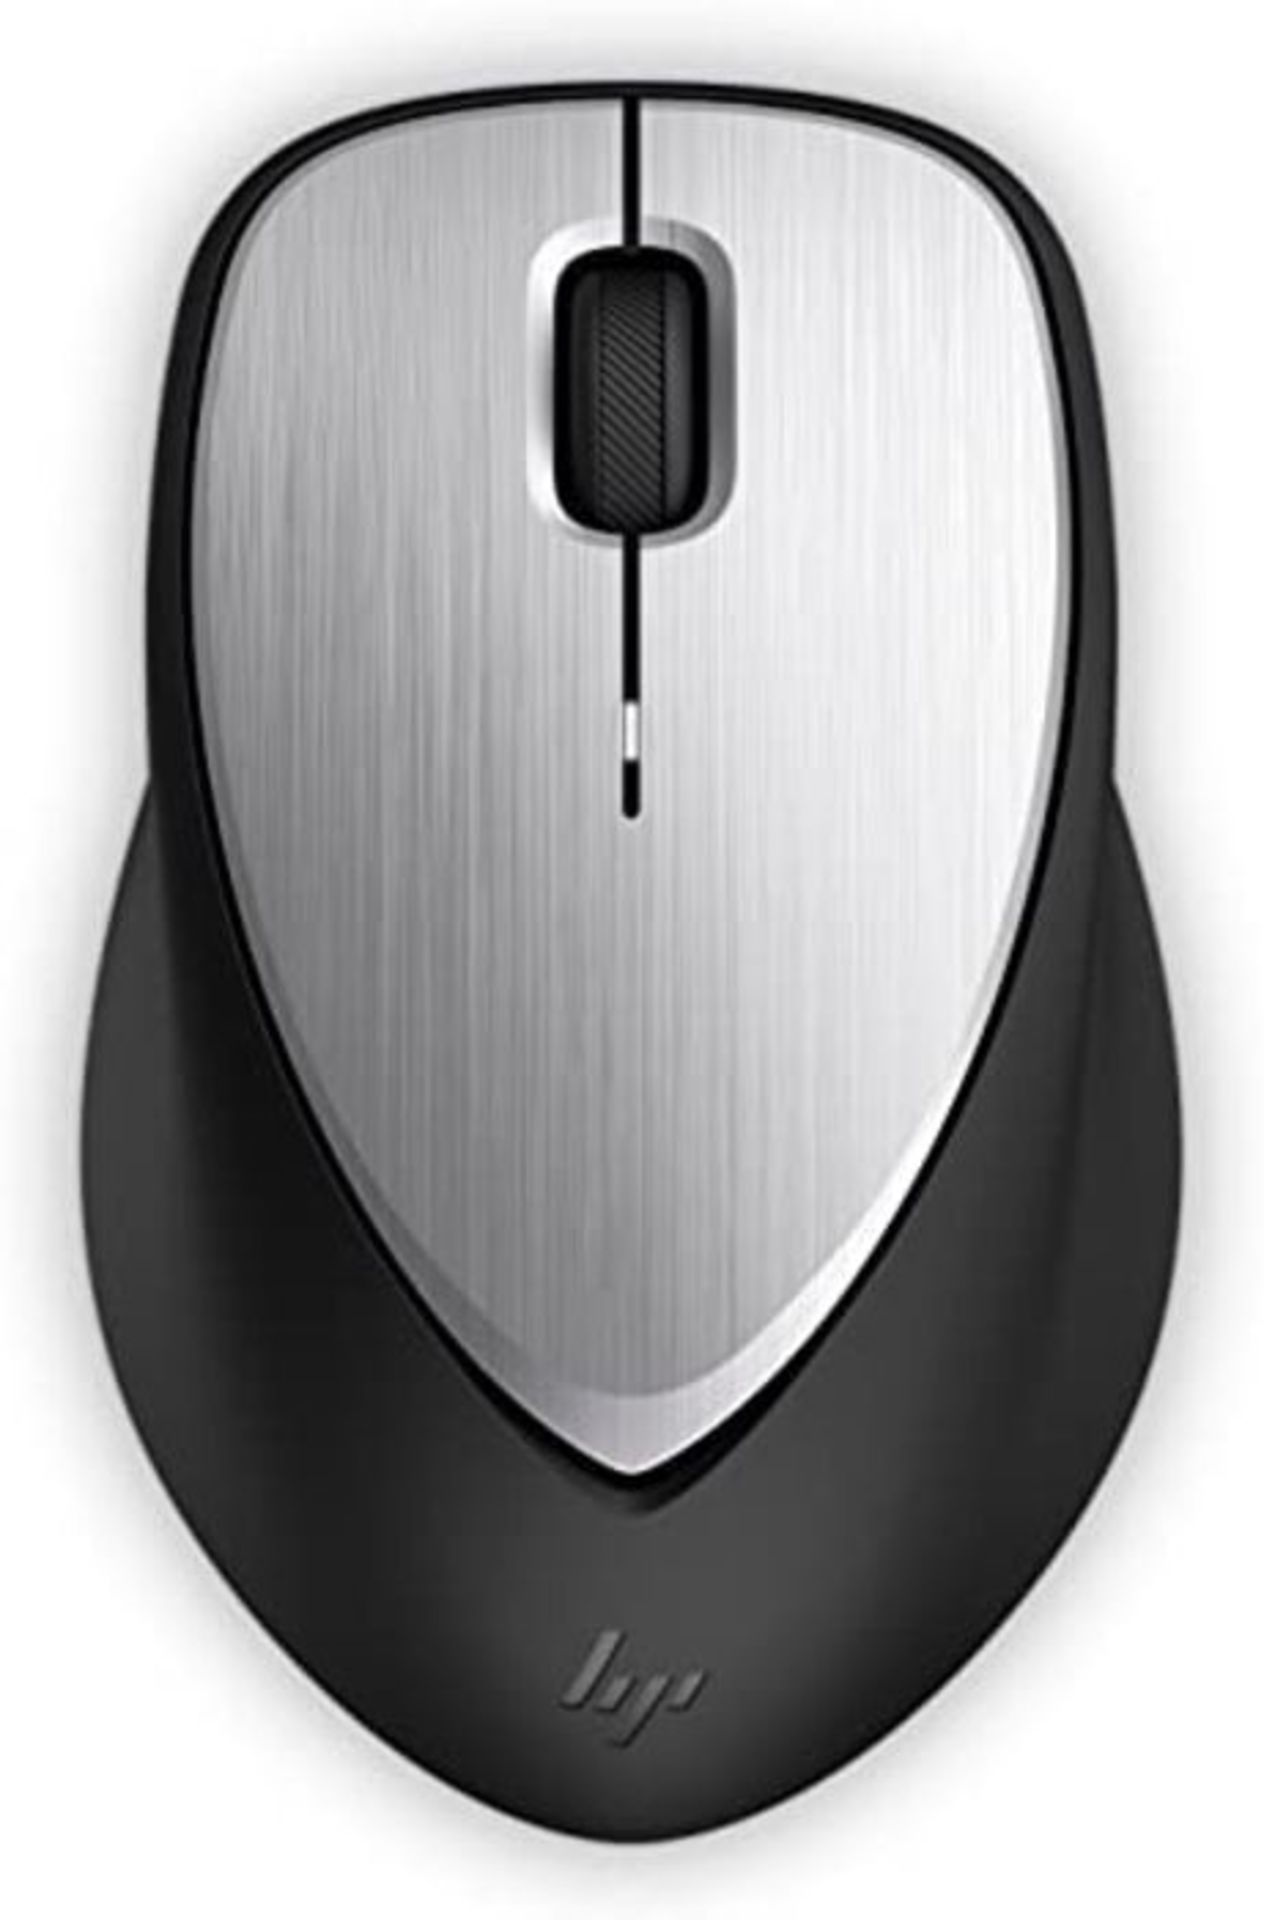 HP Envy 500 Silver 2.4 GHz USB Wireless Rechargeable Mouse with Blue LED, 800 1200 160